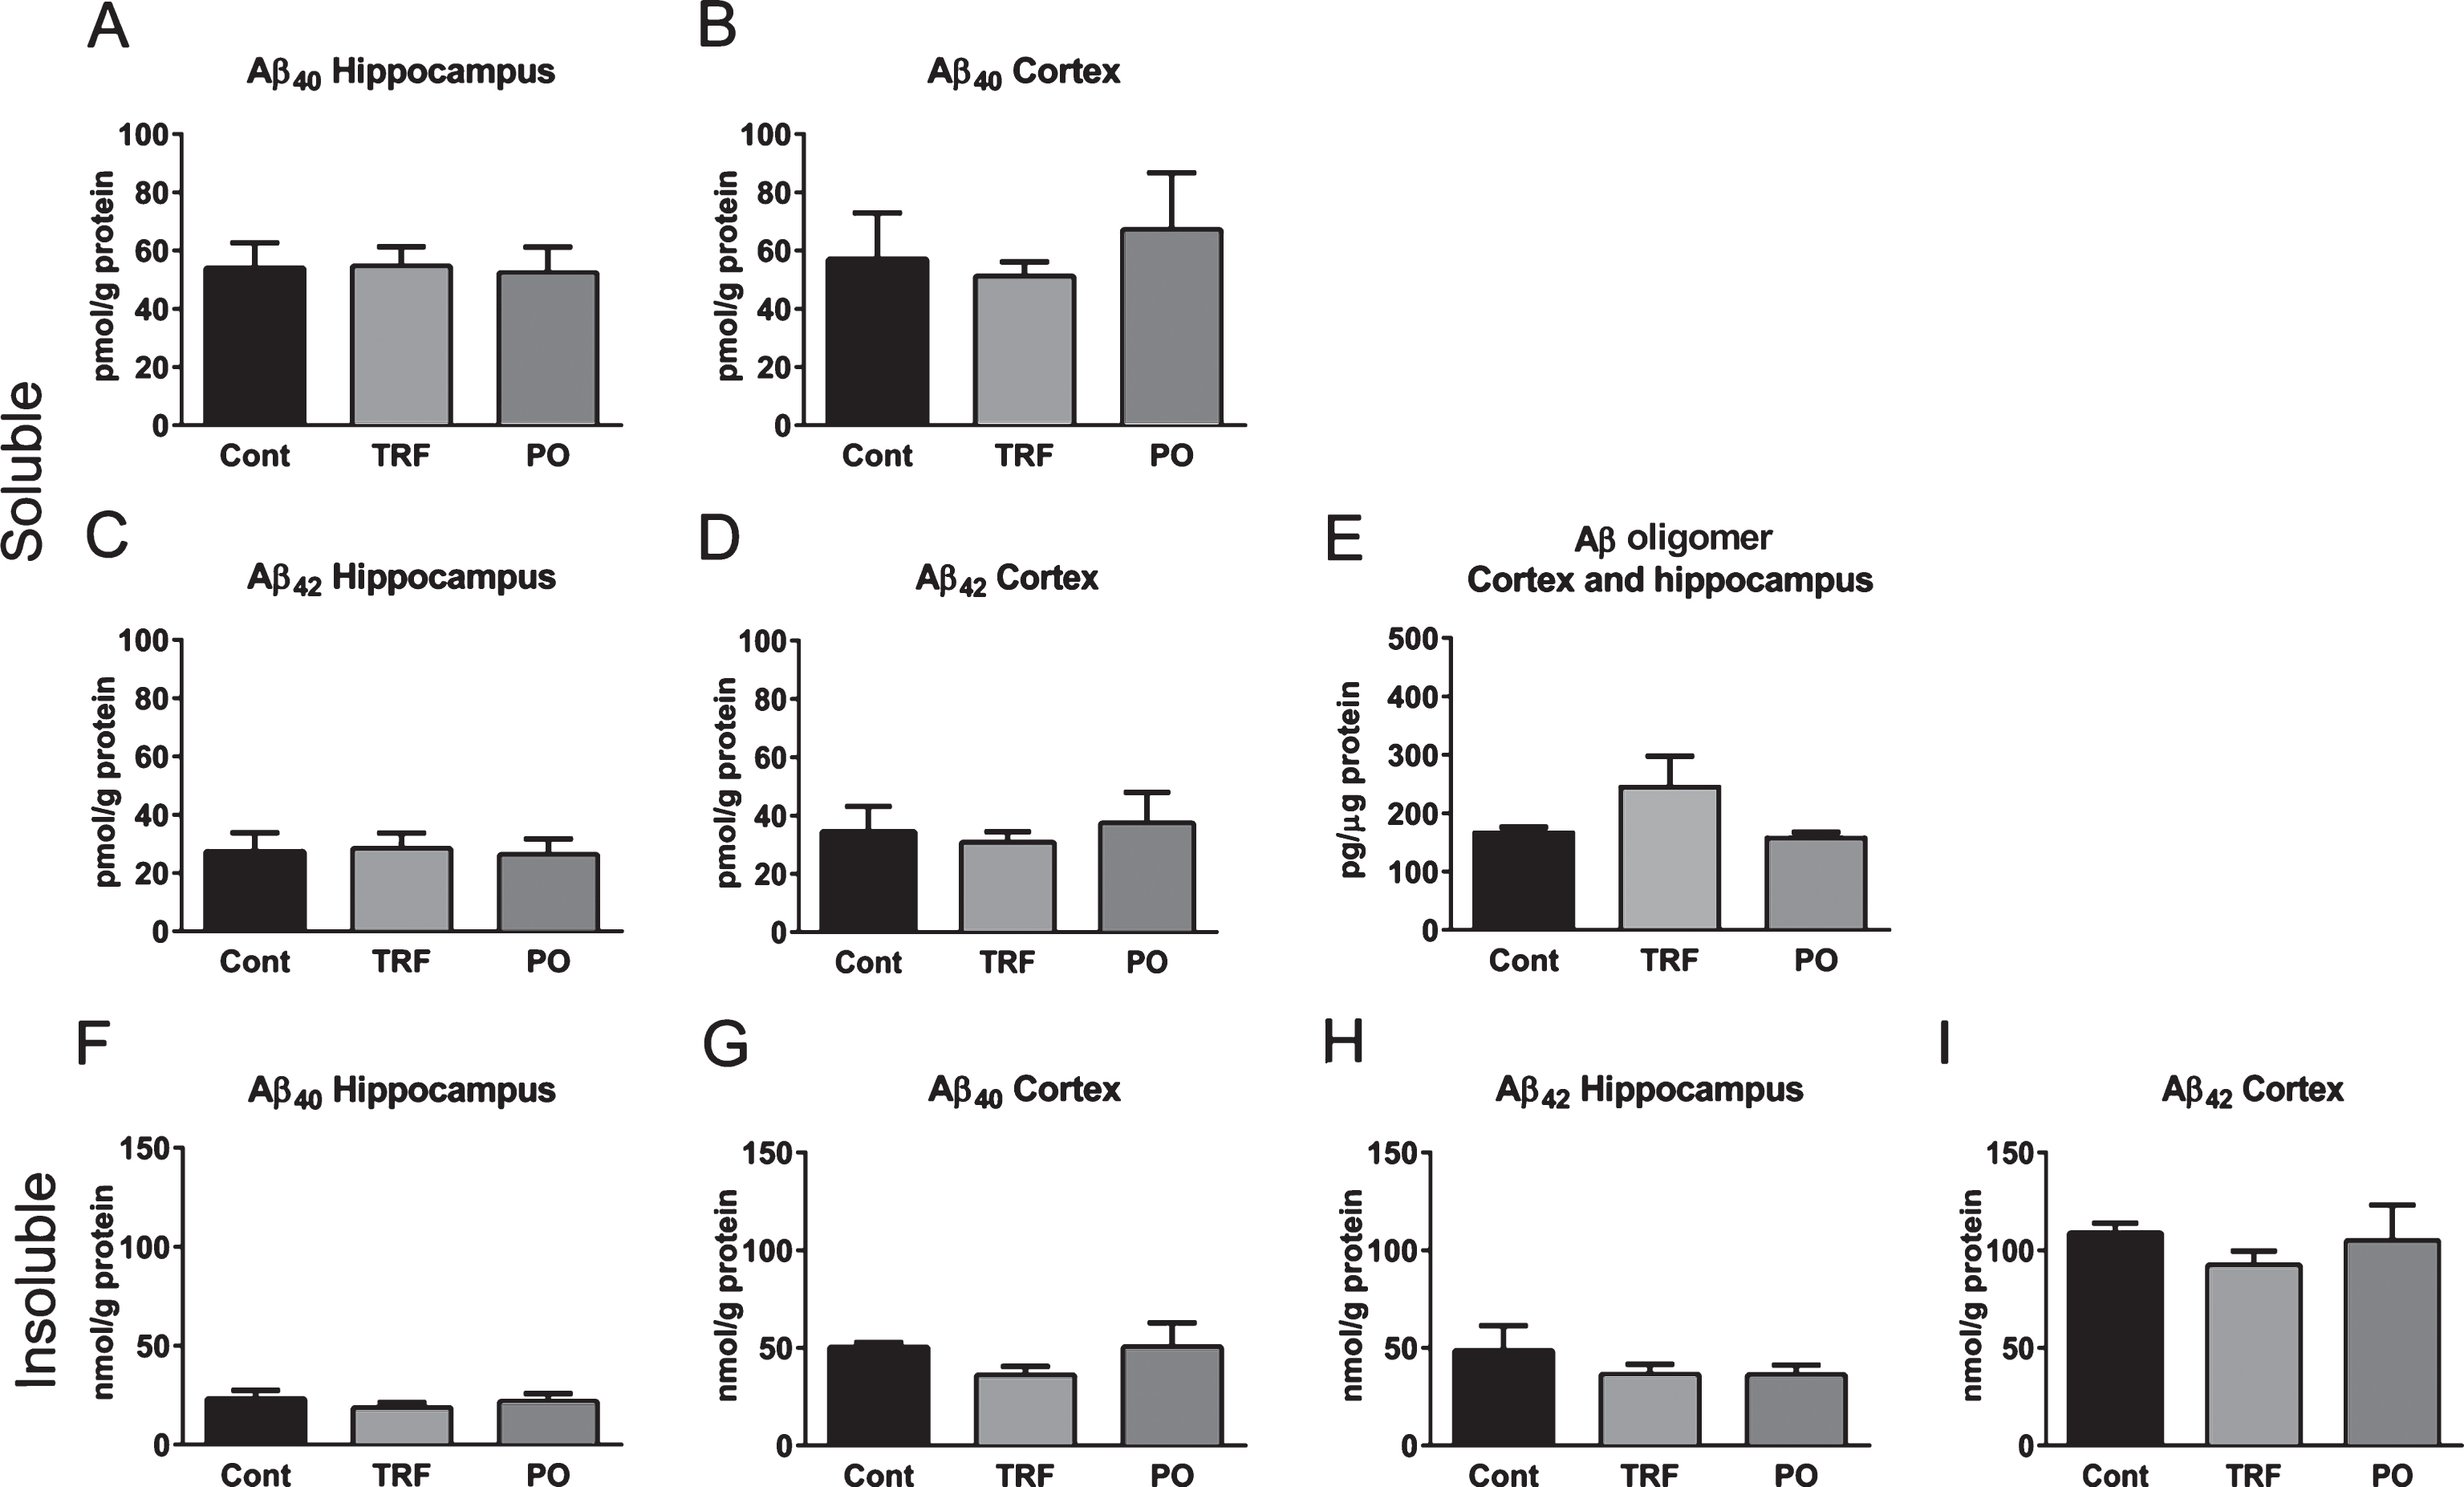 Tocotrienol-rich fraction (TRF) supplementation does not affect brain levels of Aβ in AβPP/PS1 mice. Hippocampus and cortex from AβPP/PS1 mice supplemented with water (Cont; n = 4), TRF (n = 4), or palm oil stripped of vitamin E (PO; n = 4) were homogenized and soluble (Fig. 8A–E) and insoluble (Fig. 8F–I) Aβ fractions extracted. Levels of Aβ40, Aβ42, and Aβ oligomers were determined by enzyme-linked immunosorbent assay. No significant differences in soluble and insoluble Aβ levels were found among groups, although insoluble Aβ40 and Aβ42 in the cortex was lower in the TRF-supplemented group (Fig. 8G and I). Data represent mean±S.E.M. No significance by Bonferroni post hoc test after analysis of variance.